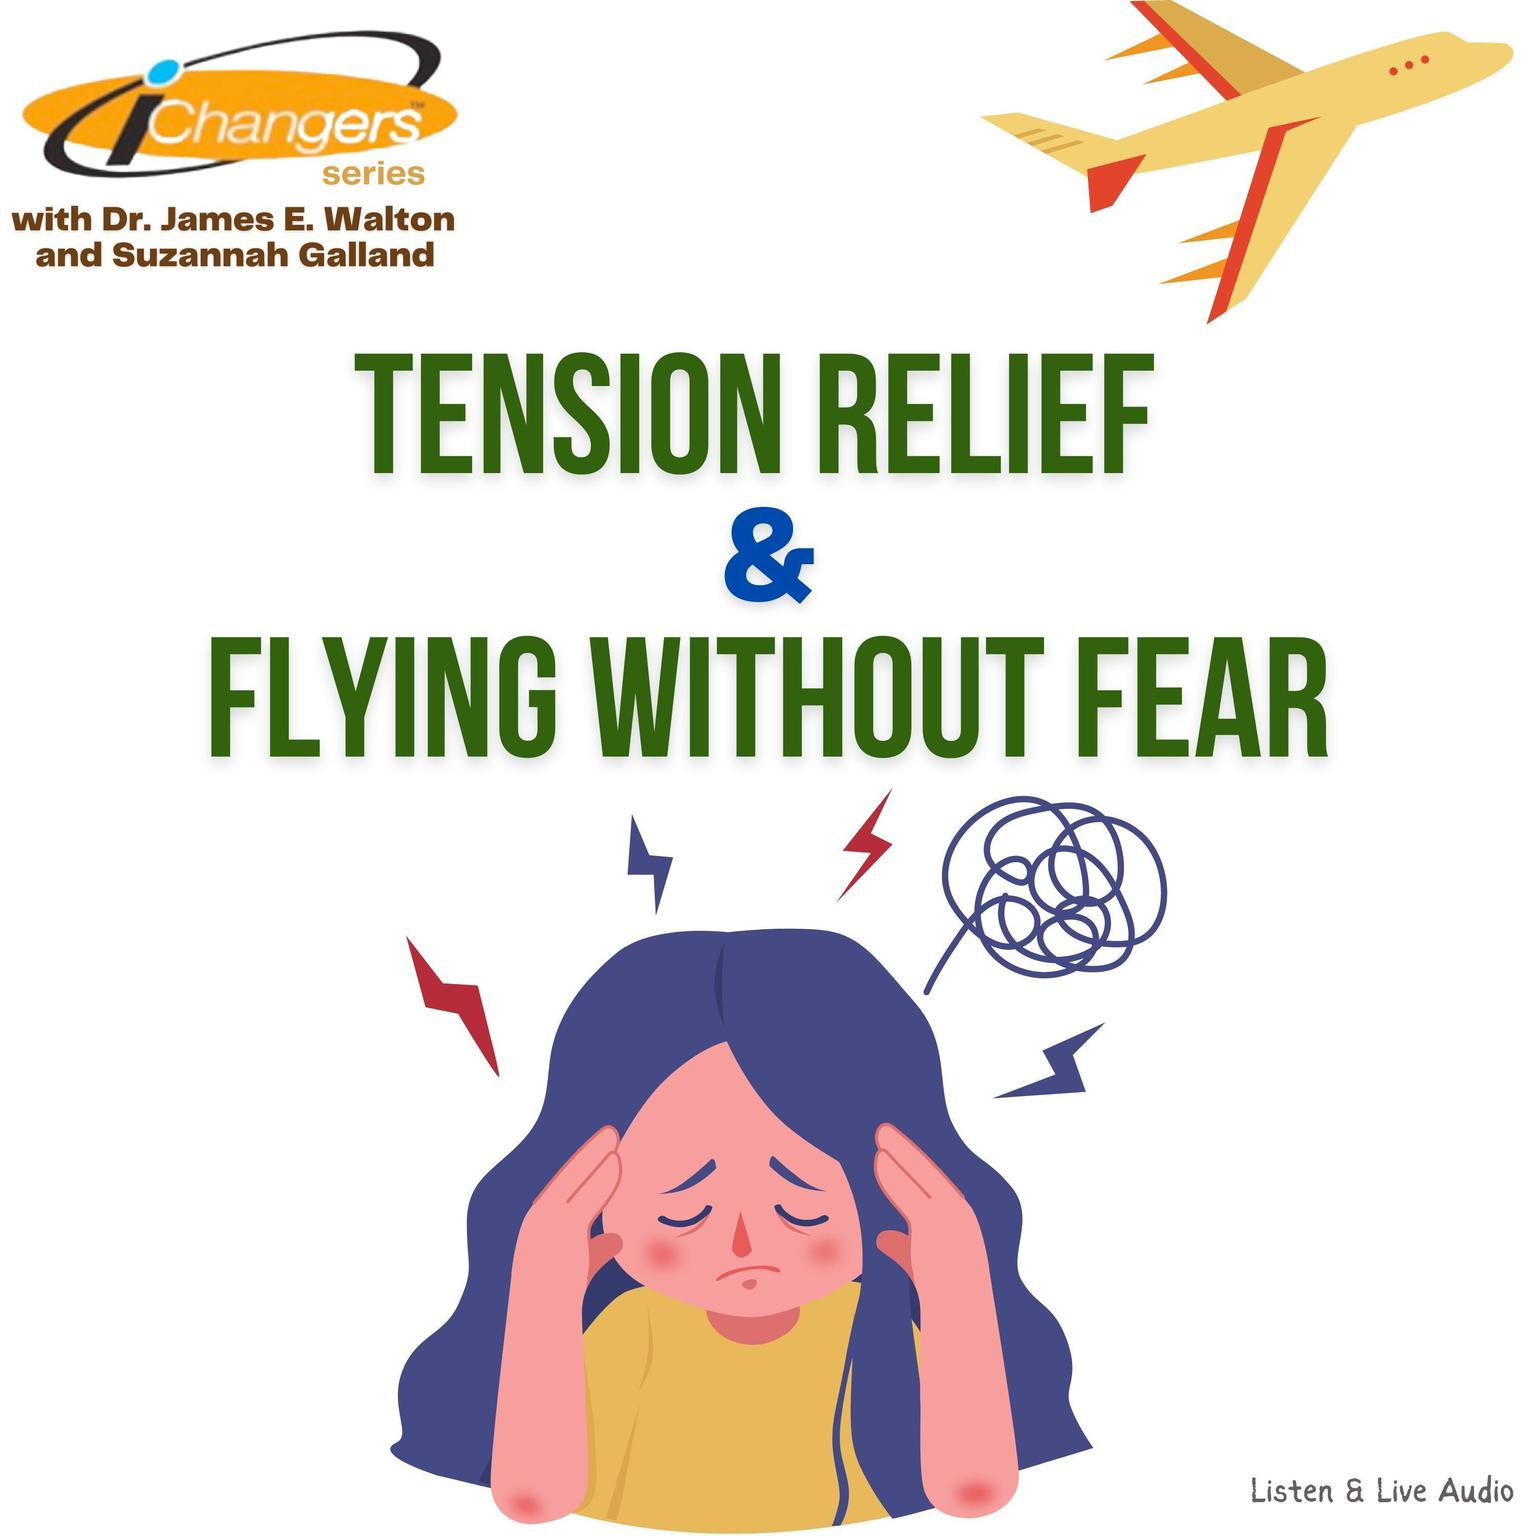 iChangers Series With Dr. James Walton and Suzannah Galland: Tension Relief & Flying Without Fear Audiobook, by James E. Walton